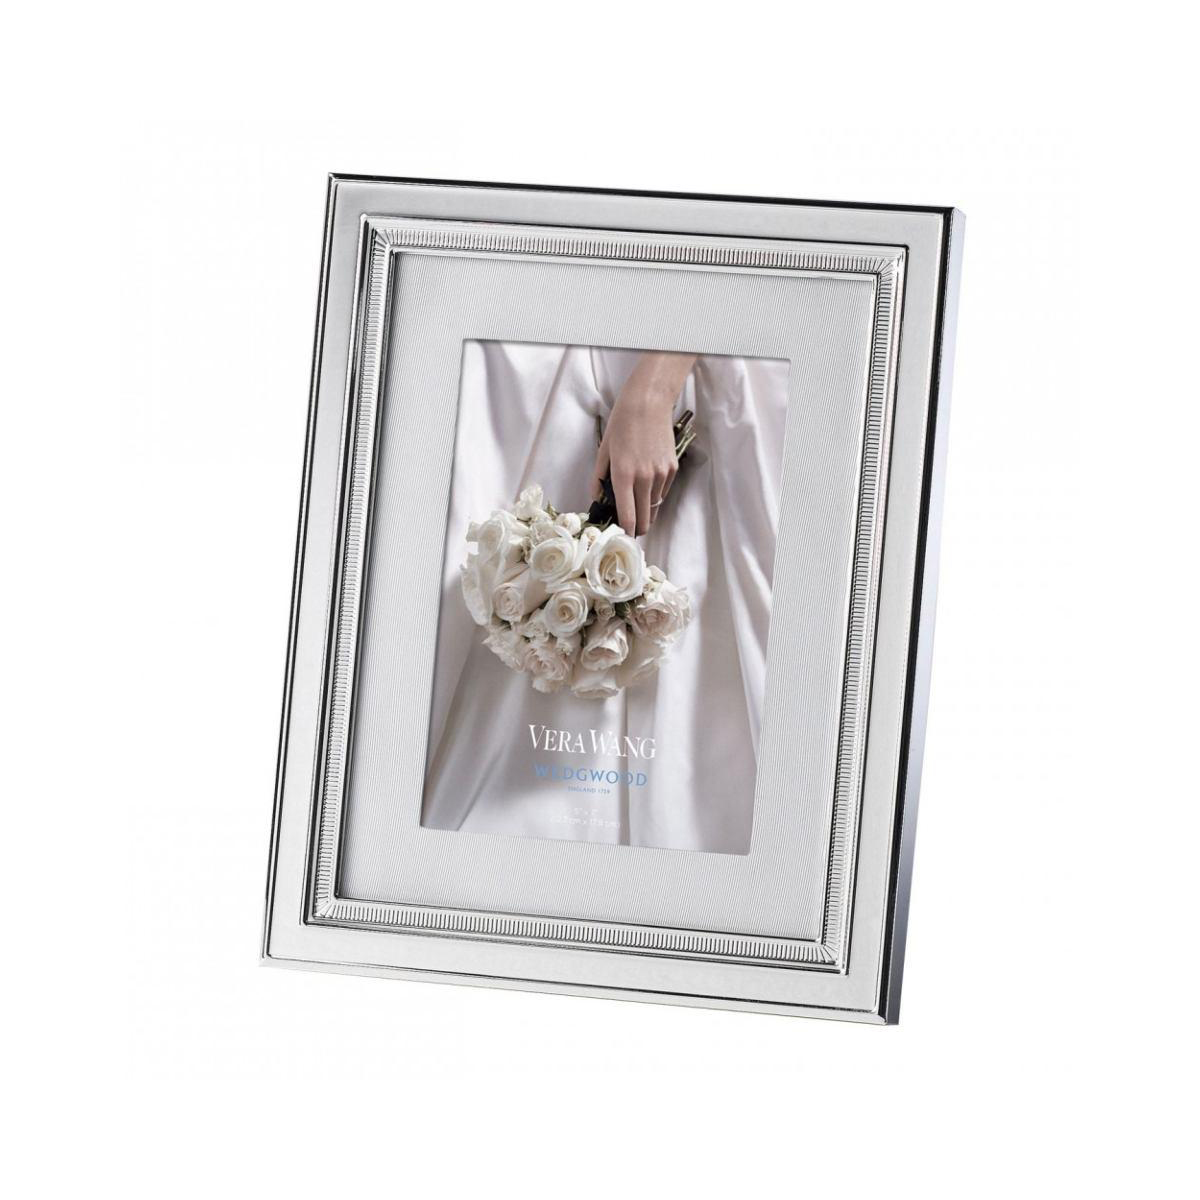 Vera Wang Wedgwood Chime With Grosgrain Matte 5x7" Picture Frame